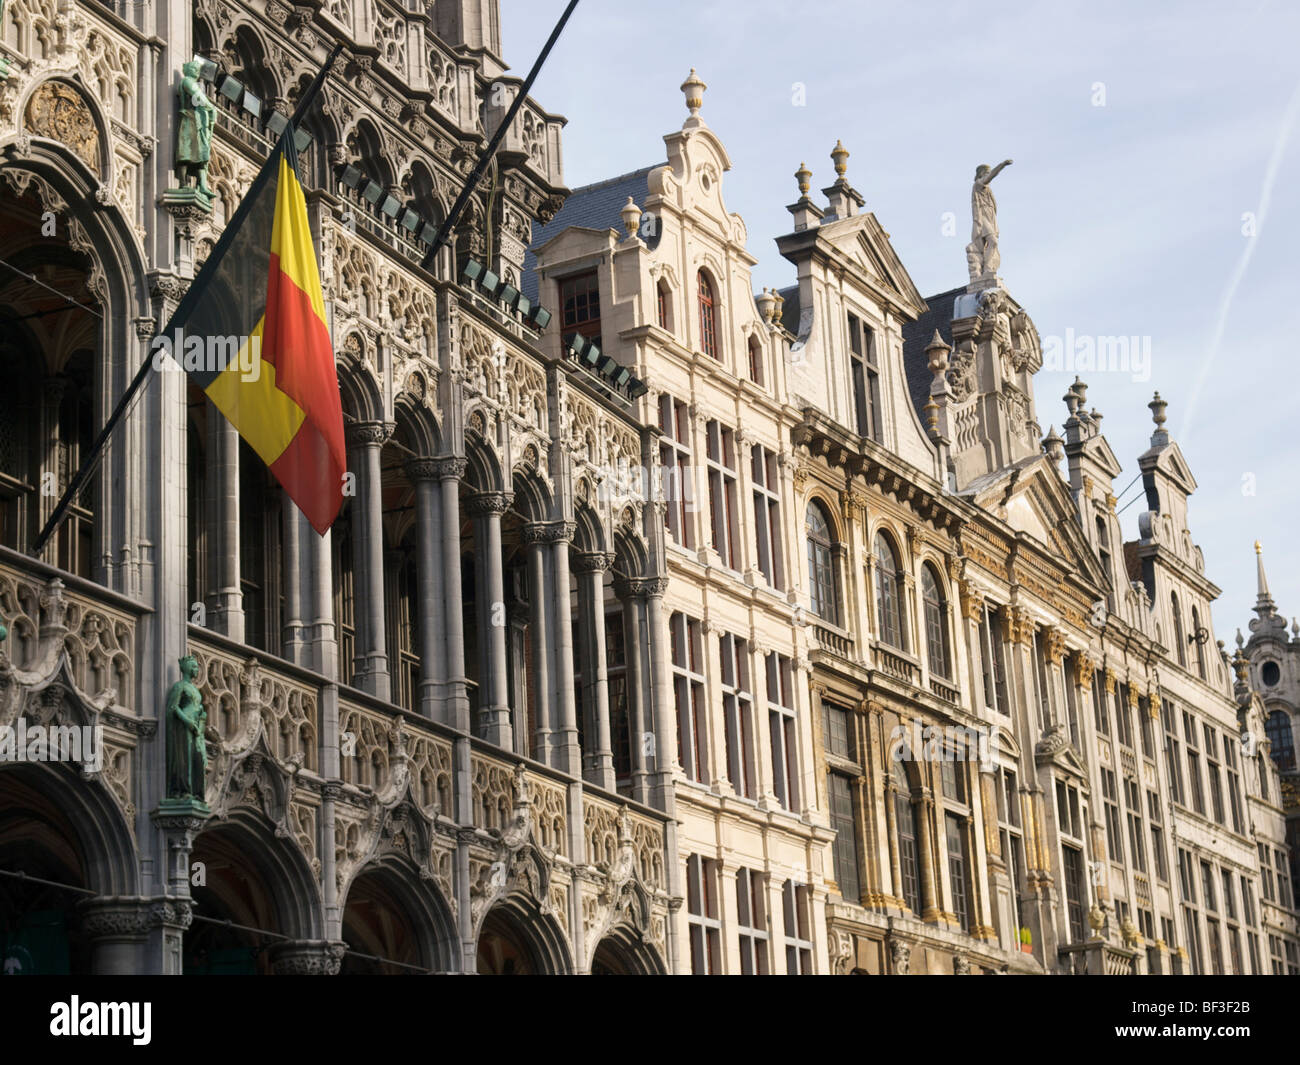 17th century historic facades on the Brussels Grand market square, Belgium, with Belgian flag. Stock Photo